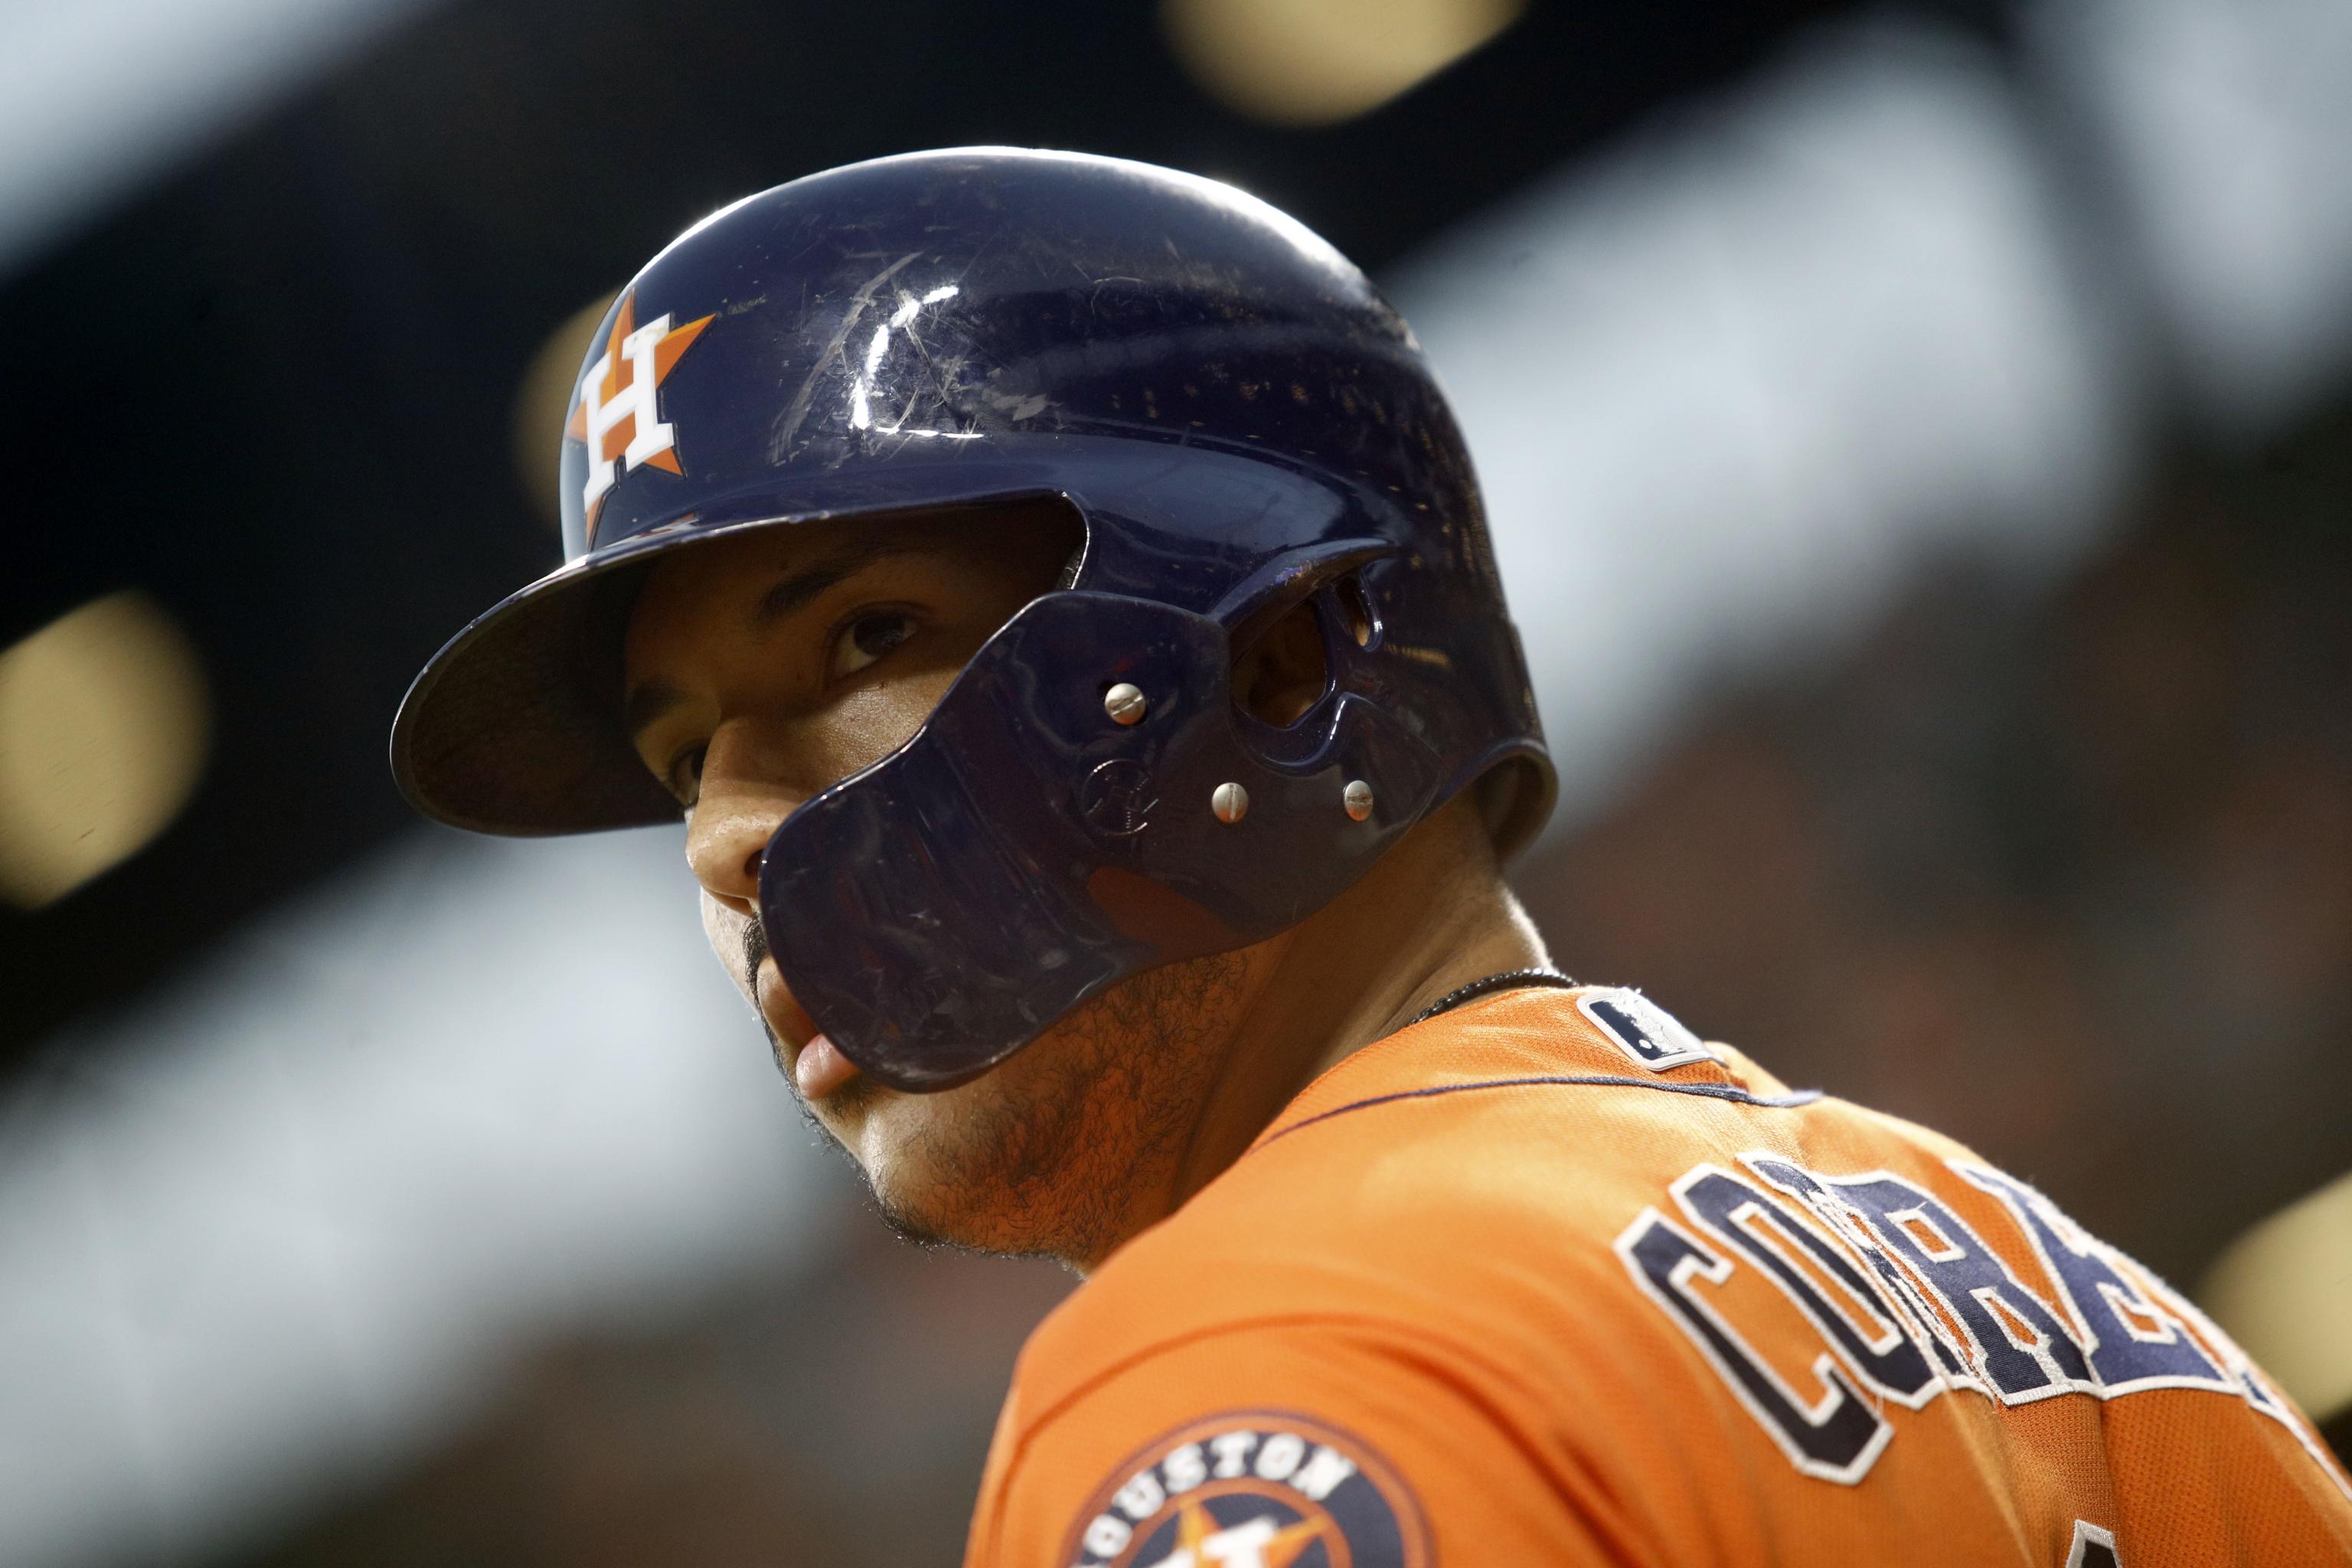 Astros Shortstop Carlos Correa and fiancée discuss fractured rib in video -  The Crawfish Boxes